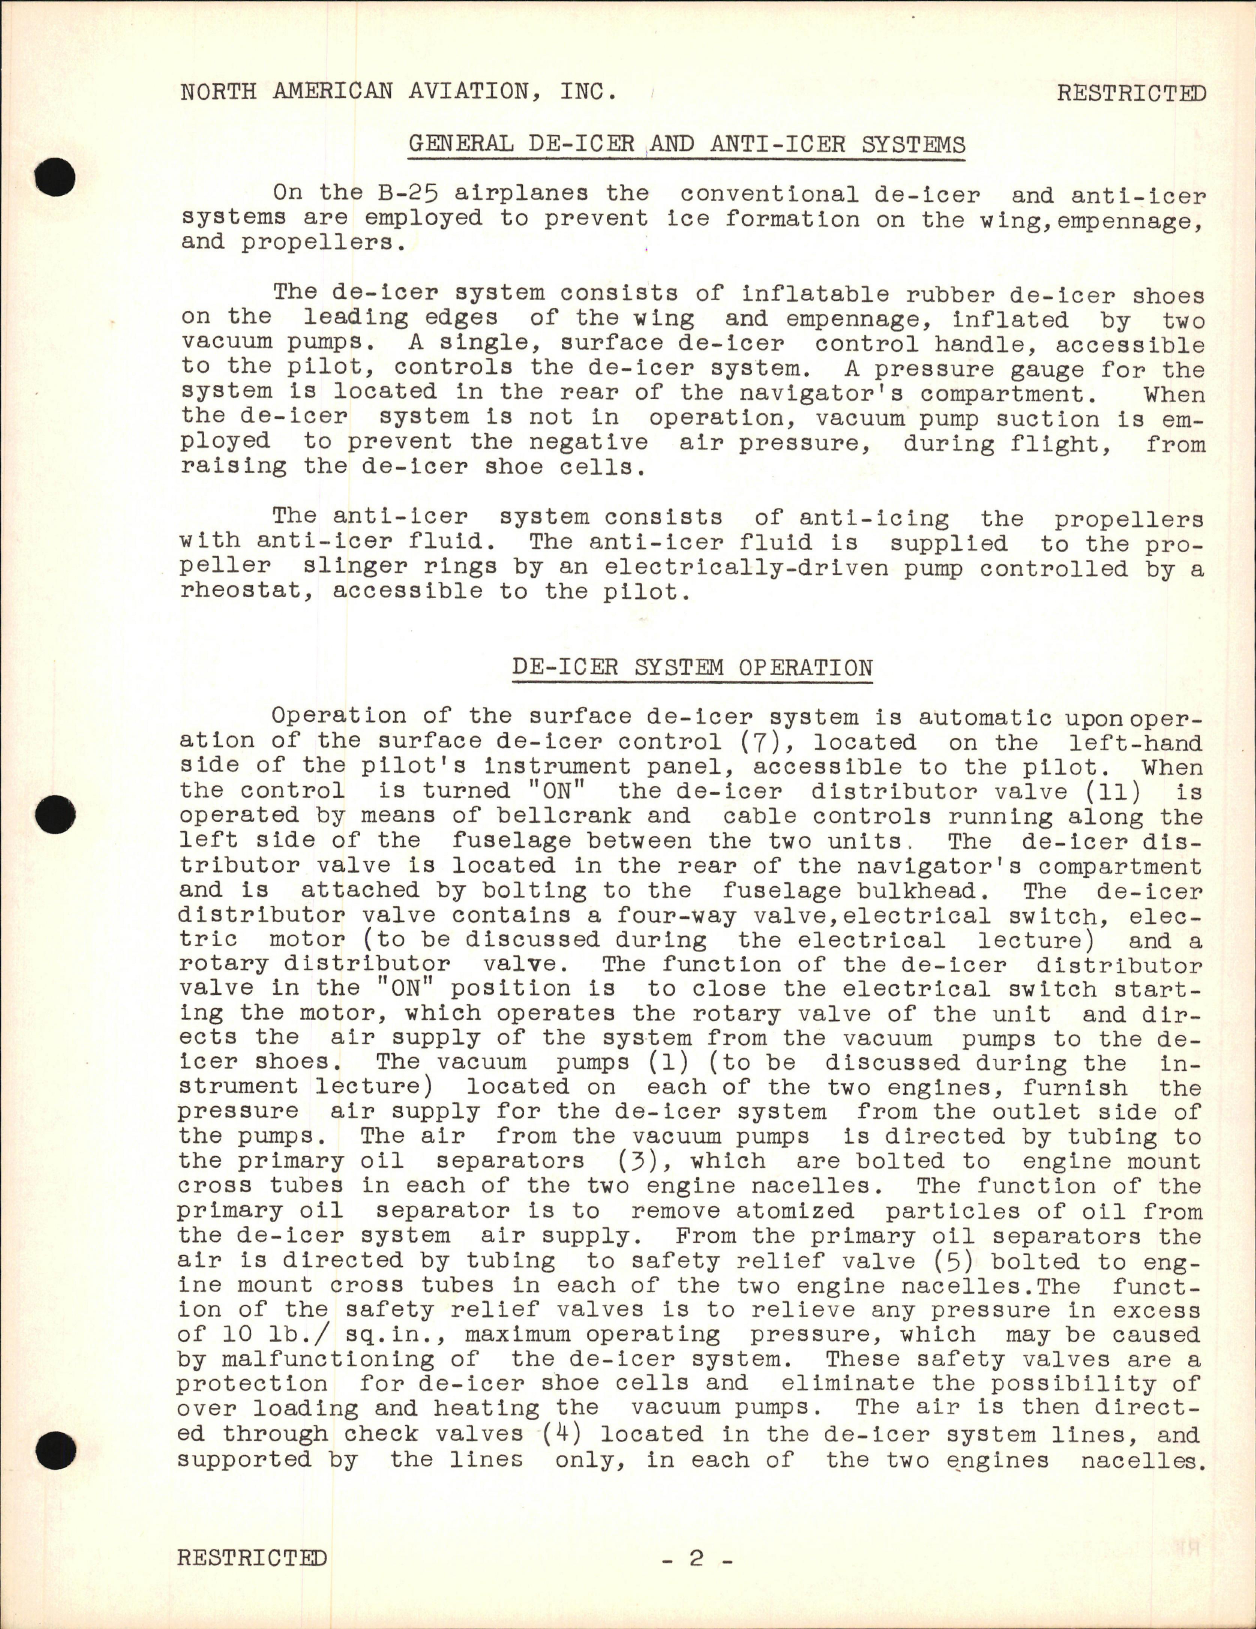 Sample page 5 from AirCorps Library document: Service School Lectures - De-Icer System